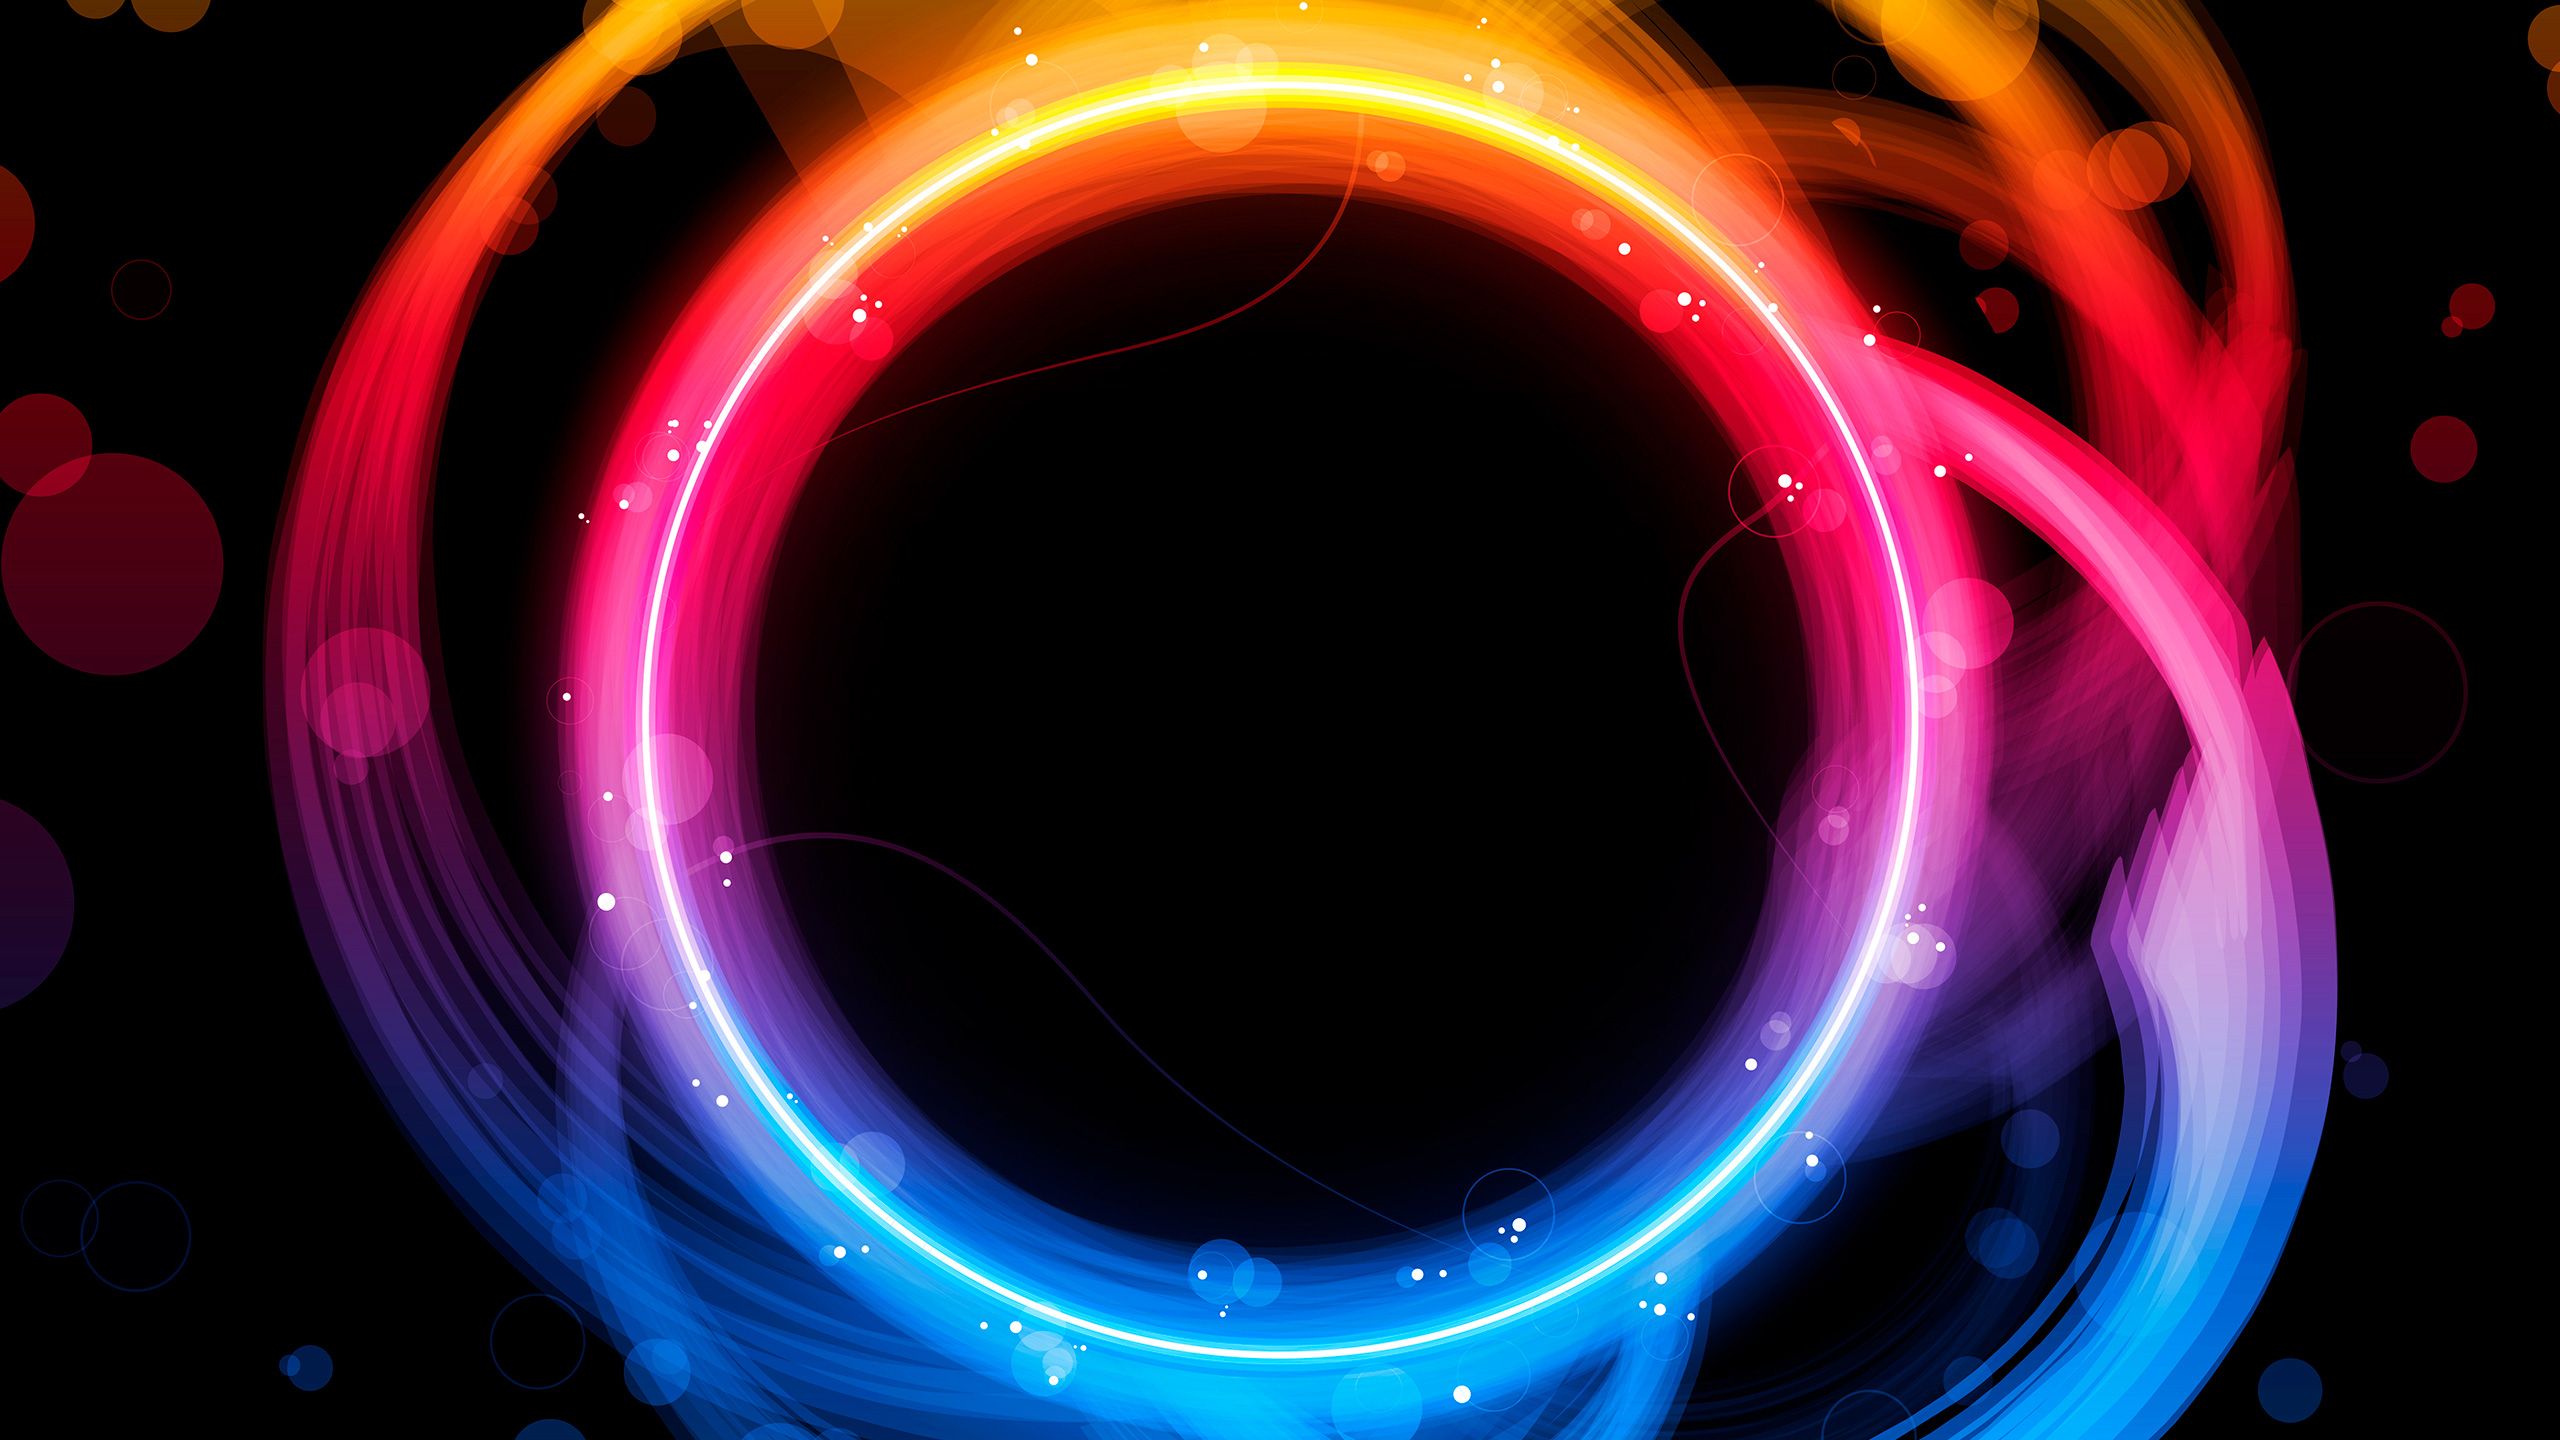 Abstract Colorful Rings Wallpaper